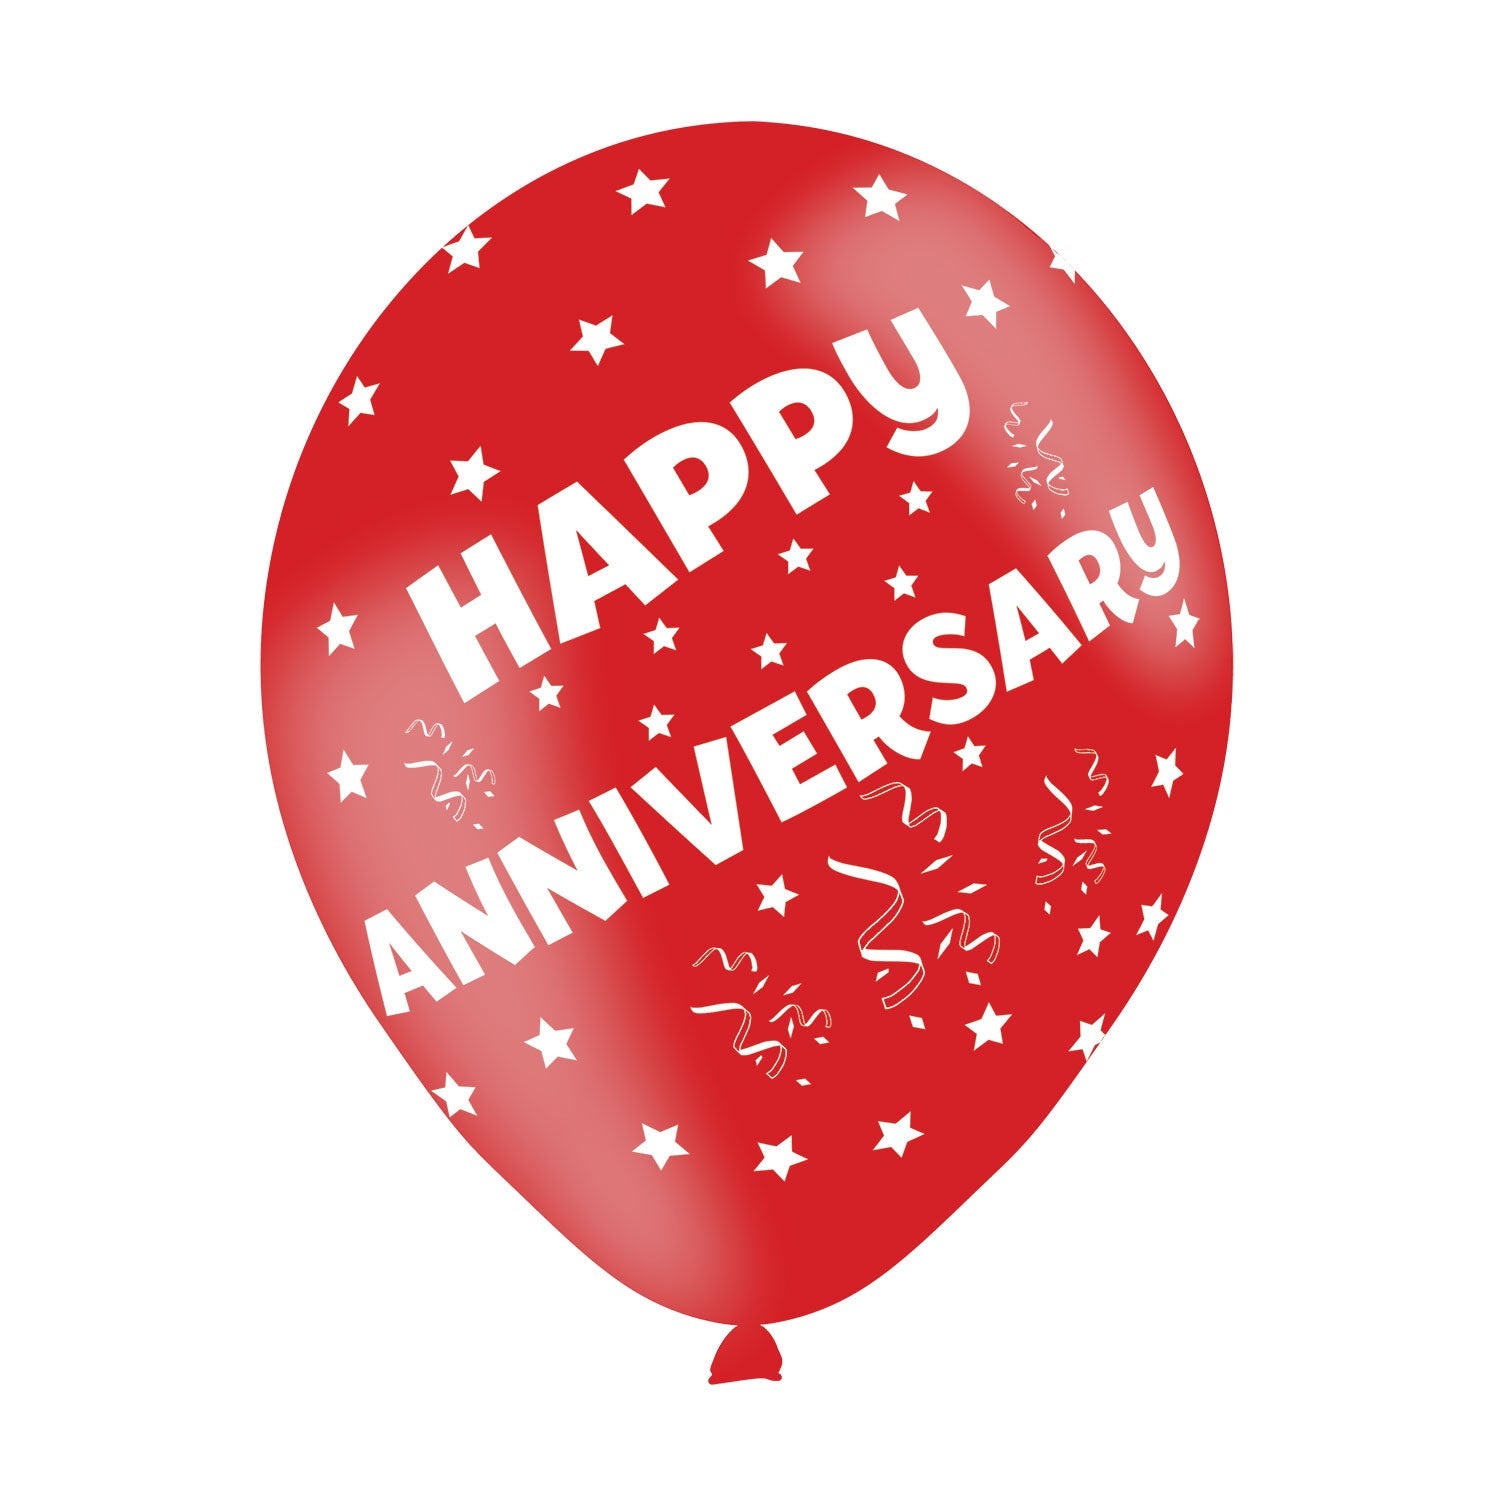 Happy Anniversary Latex Balloons. Assorted Colours. Will inflate up to 27cm. Suitable for Air fill or Helium fill.